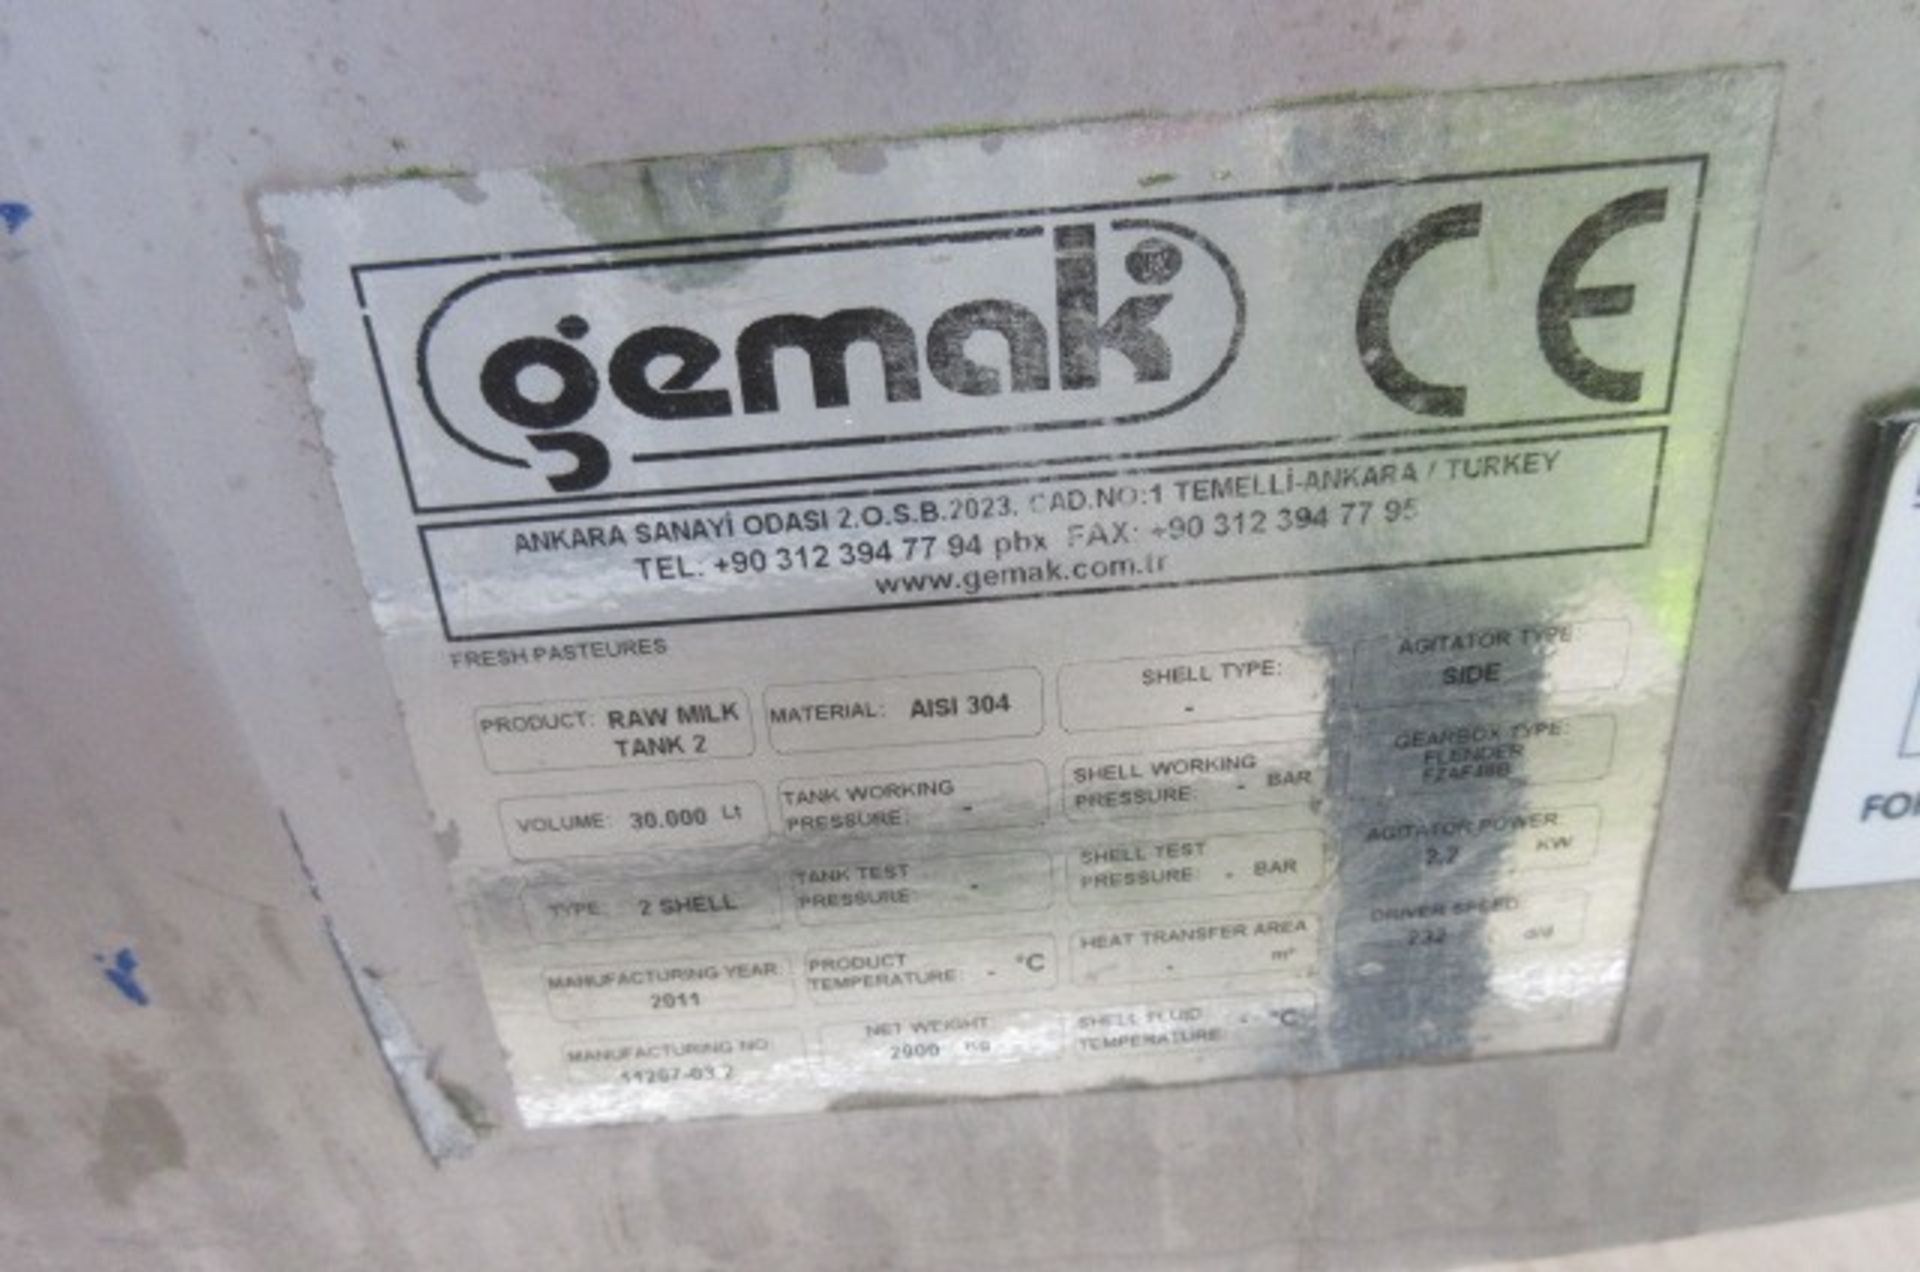 Gemak s/s insulated and agitated raw milk storage tank,30,000 litres (2011) - Image 3 of 4